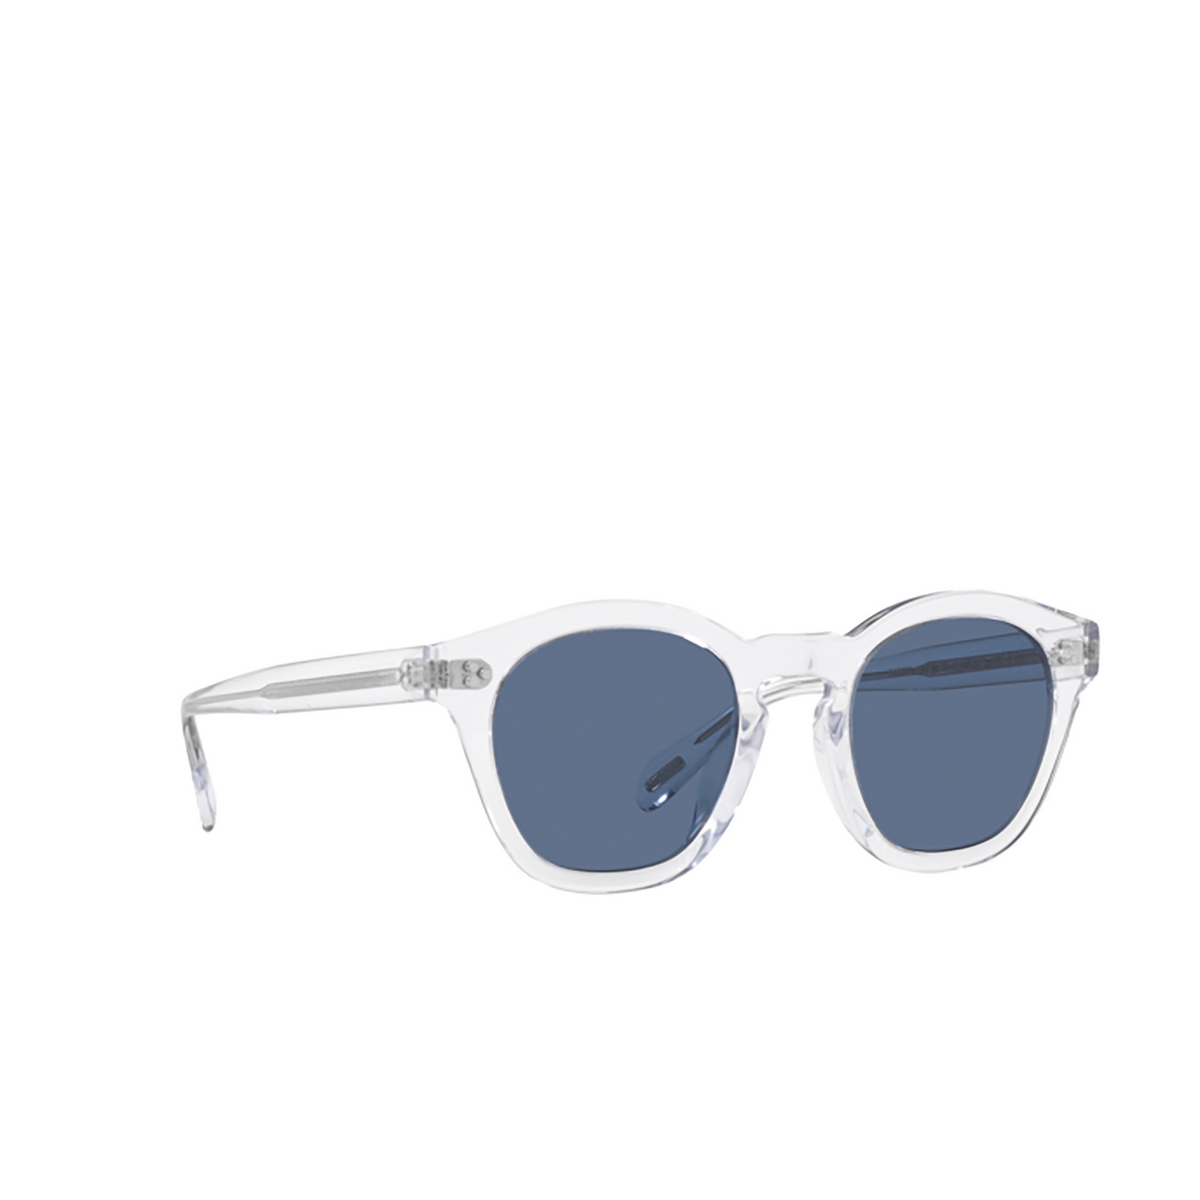 Oliver Peoples BOUDREAU L.A Sunglasses 110180 Crystal - three-quarters view